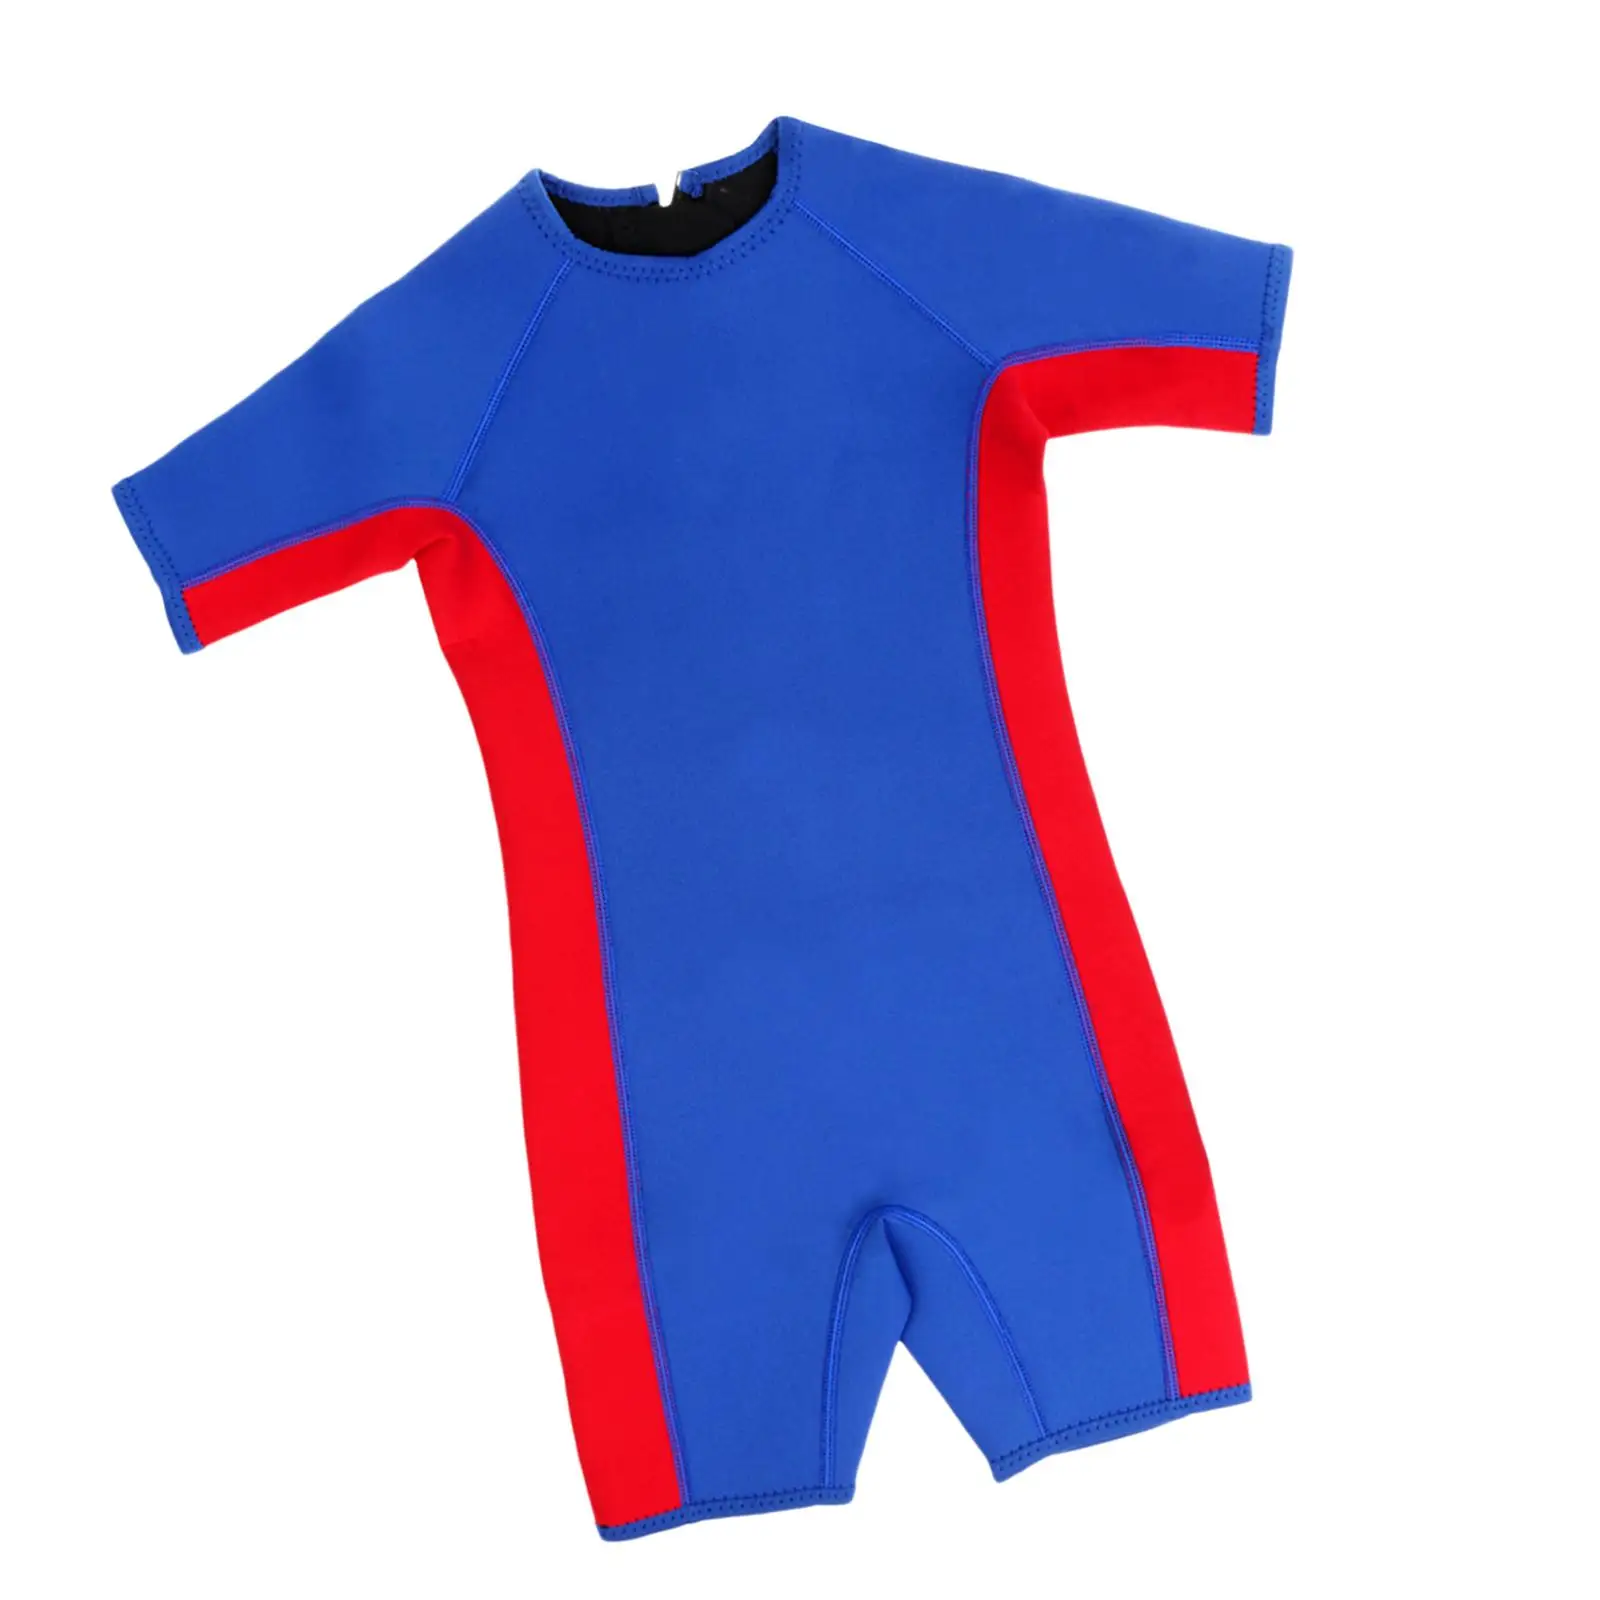  Wetsuit Premium Neoprene 3mm, Children/Toddle/Youth Swim Suit All Size